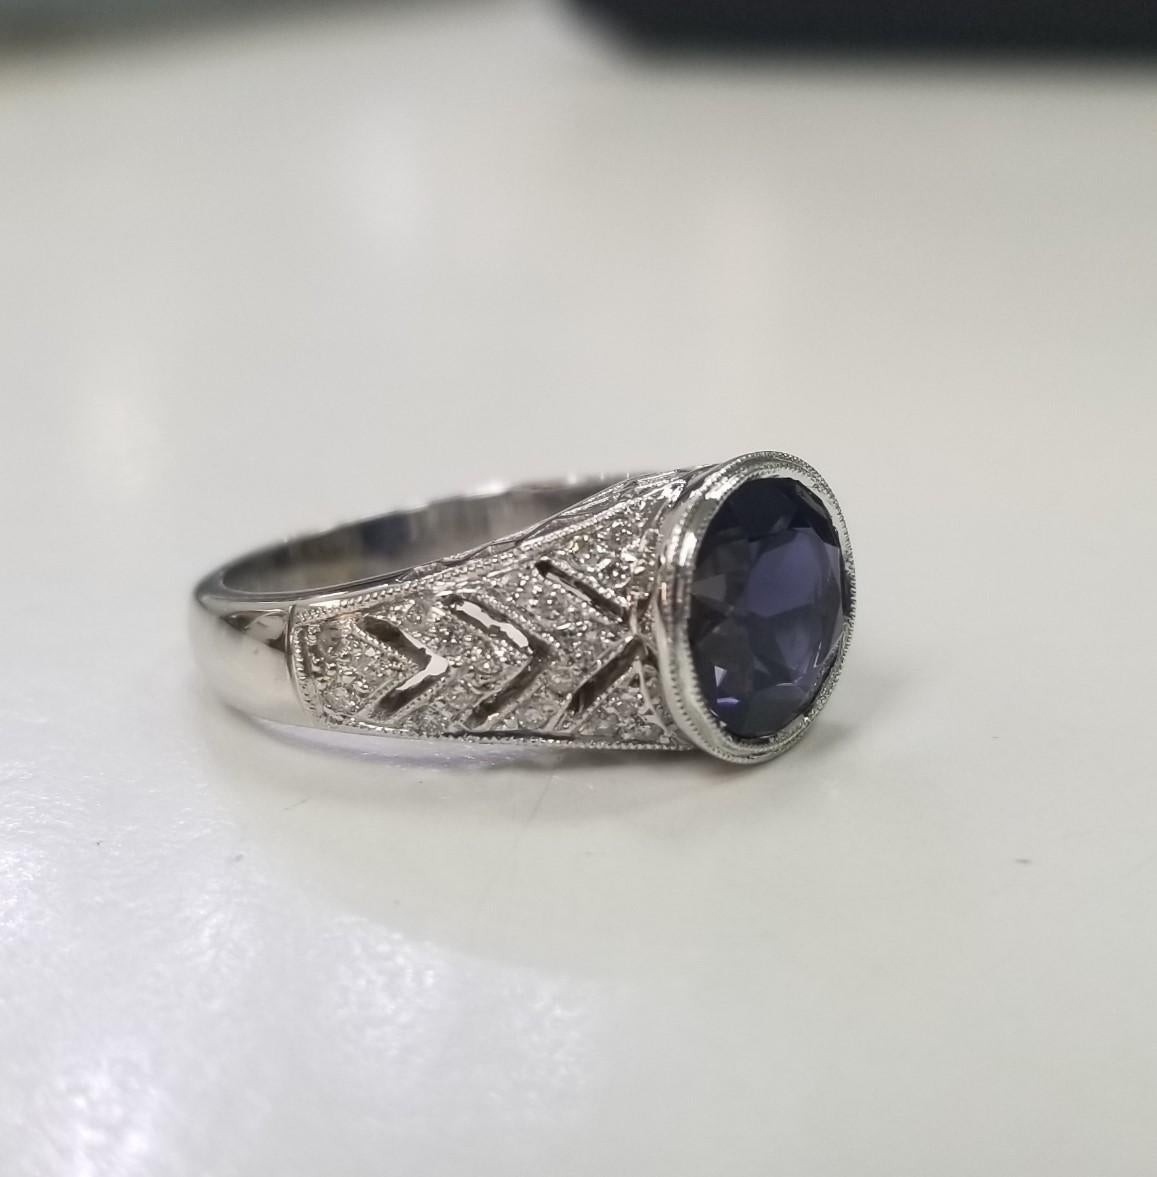 14k white gold Iolite and diamond ring, containing 1 round Iolite of gem quality weighing 2.47cts. and 38 round full cut diamonds weighing .28pts.  This ring is a size 6.5 but we will size to fit for free.